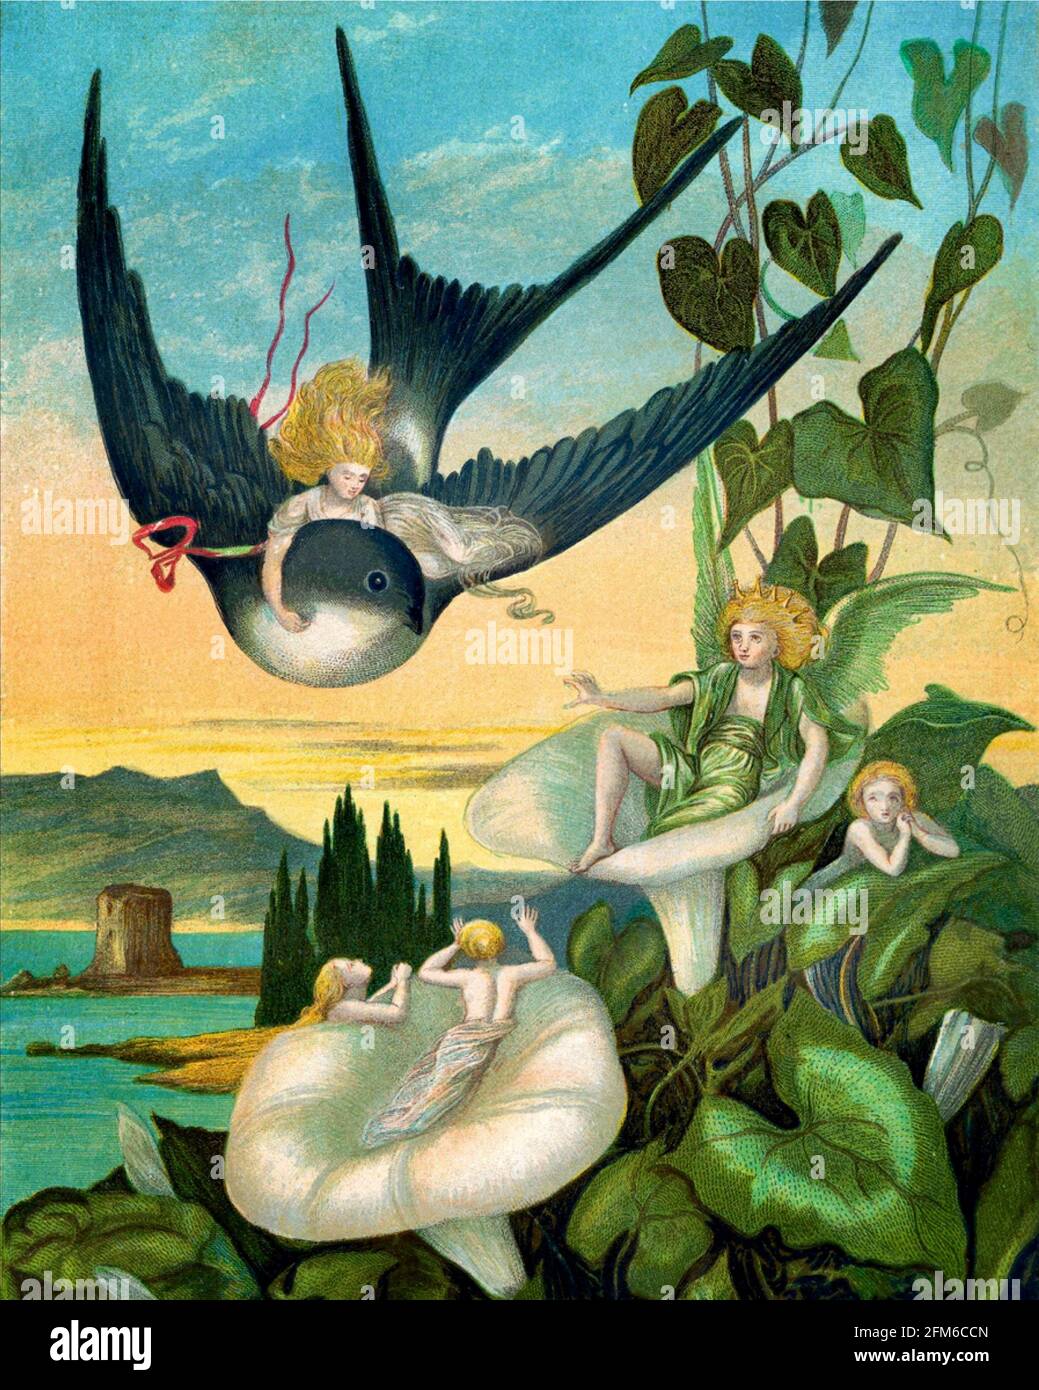 Eleanor Vere Boyle artwork - Thumbelina - 'Tommelise borne on the Swallow's back to the South, where she sees the Fairy Flower-Prince. Stock Photo